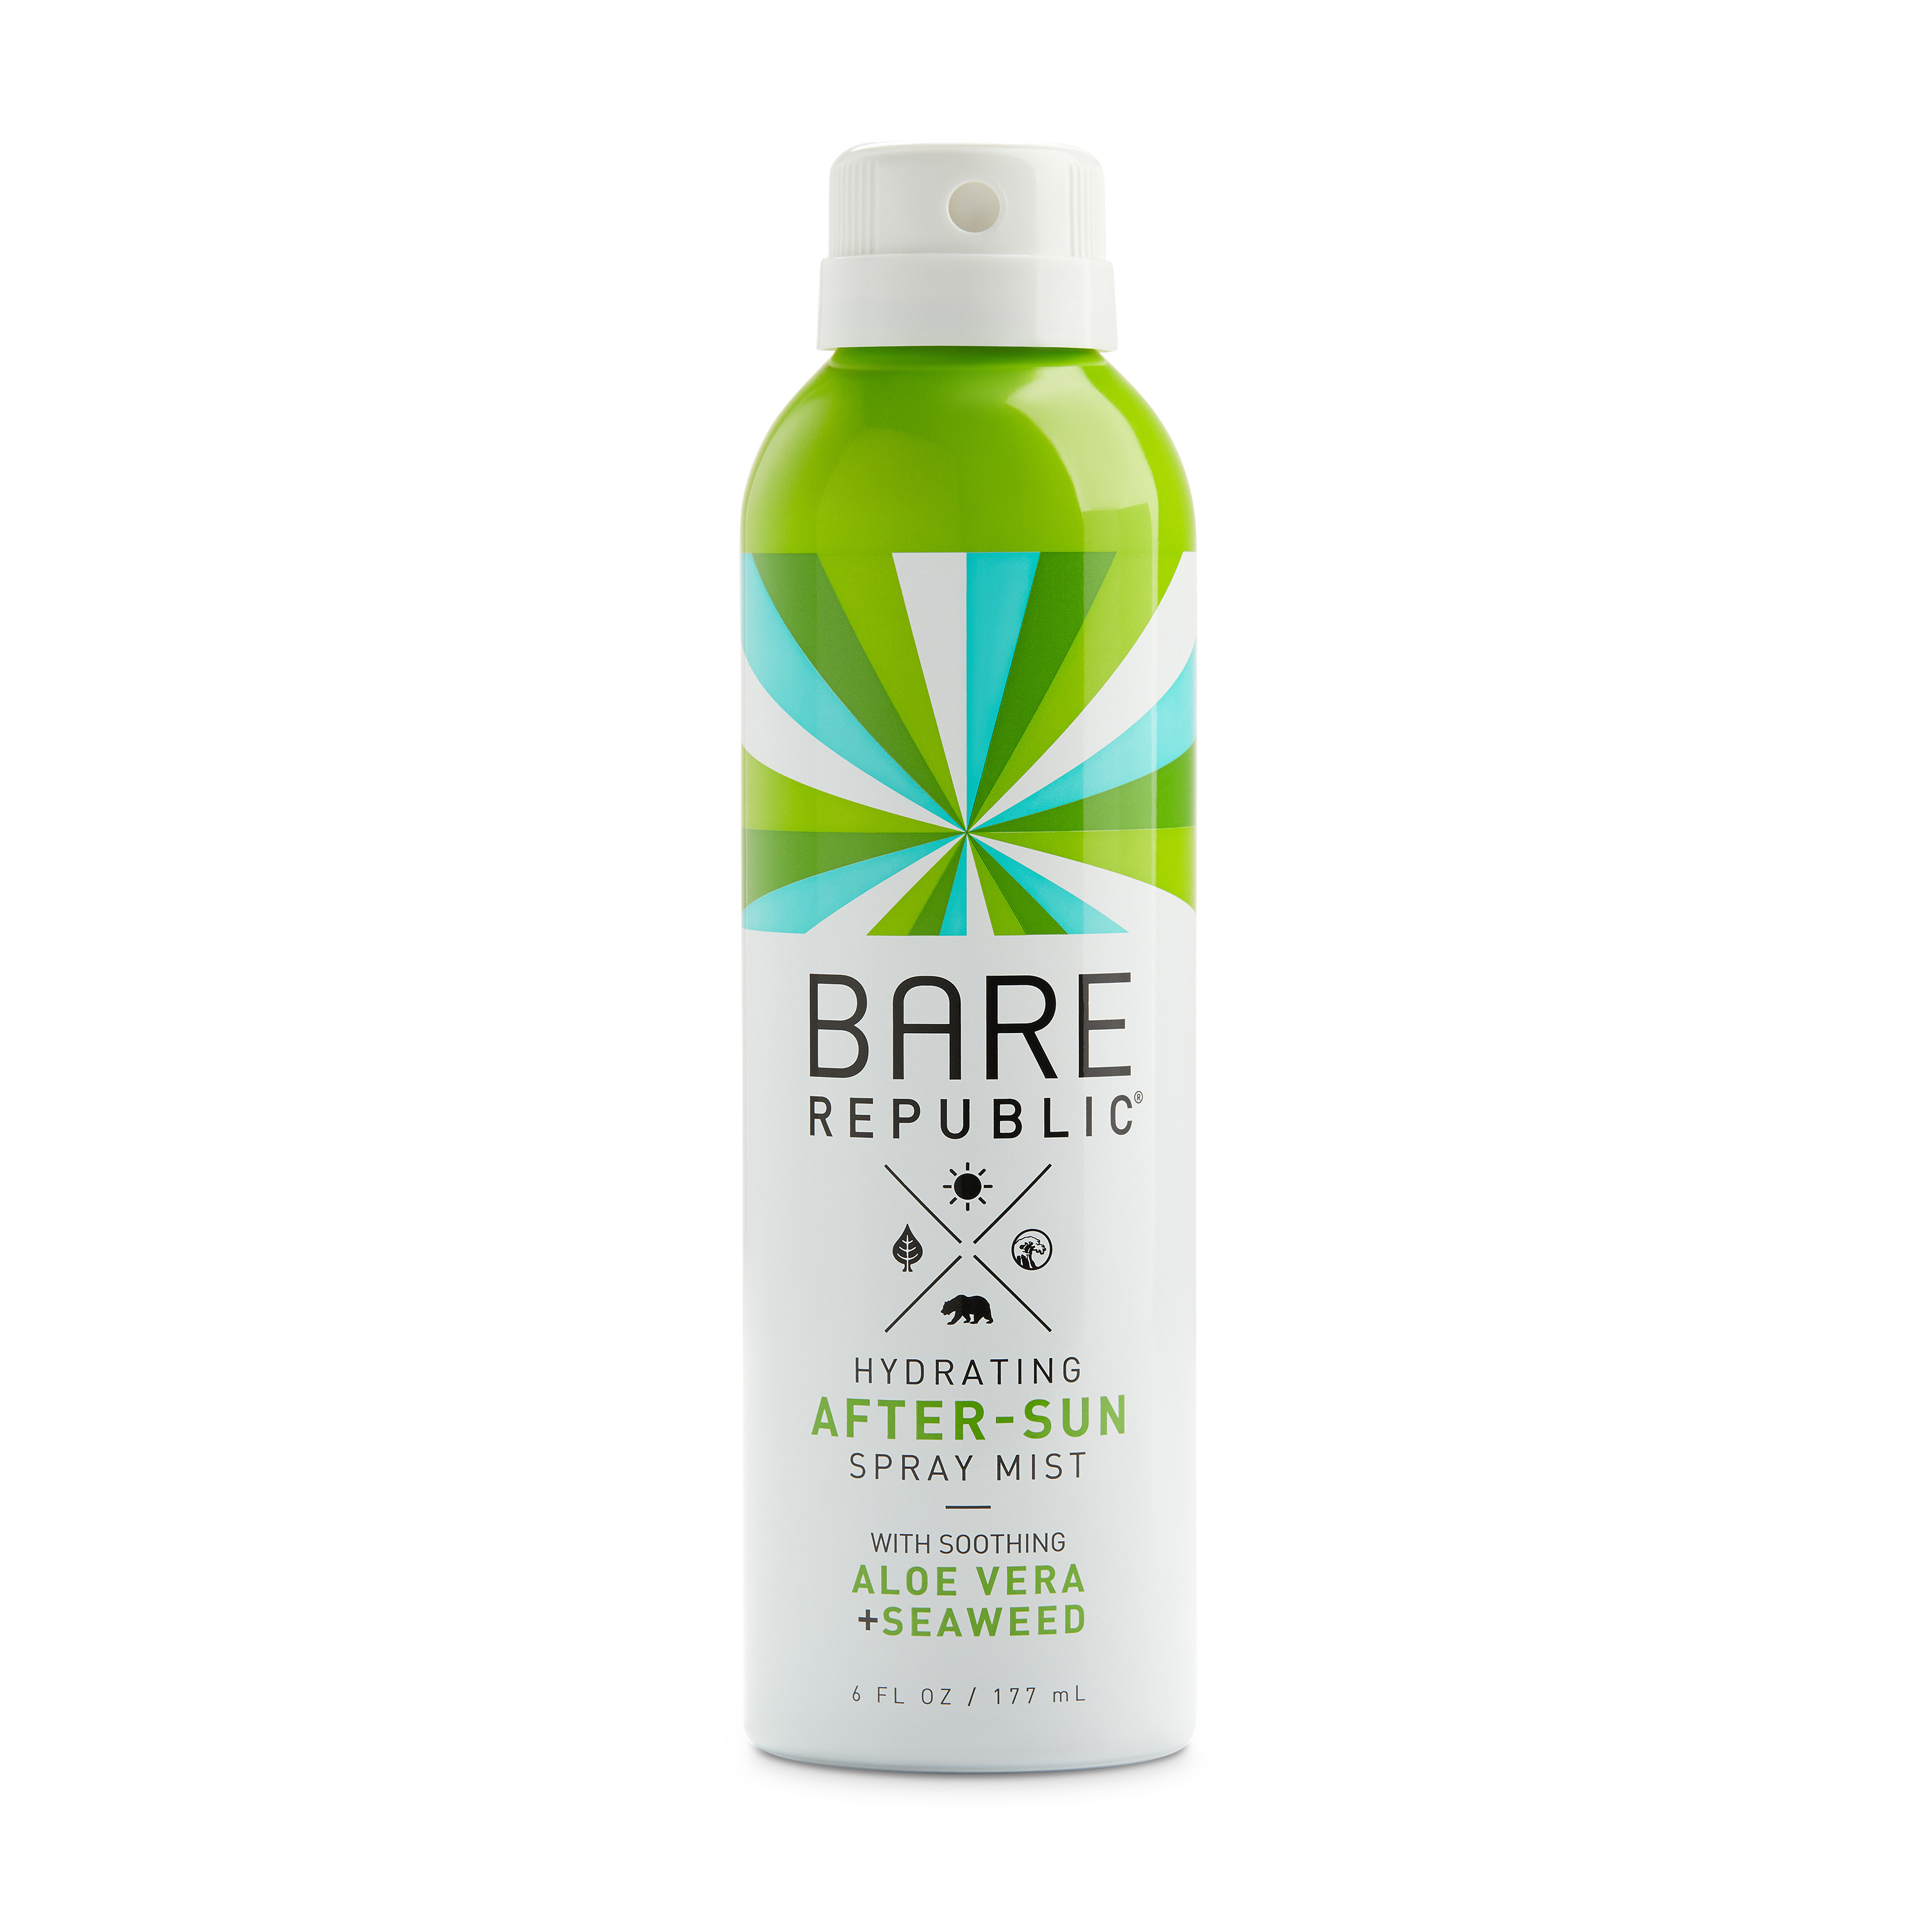 Bare Republic Hydrating After Sun Body Spray, Includes Aloe Vera and Seaweed, 6 fl oz - image 1 of 5